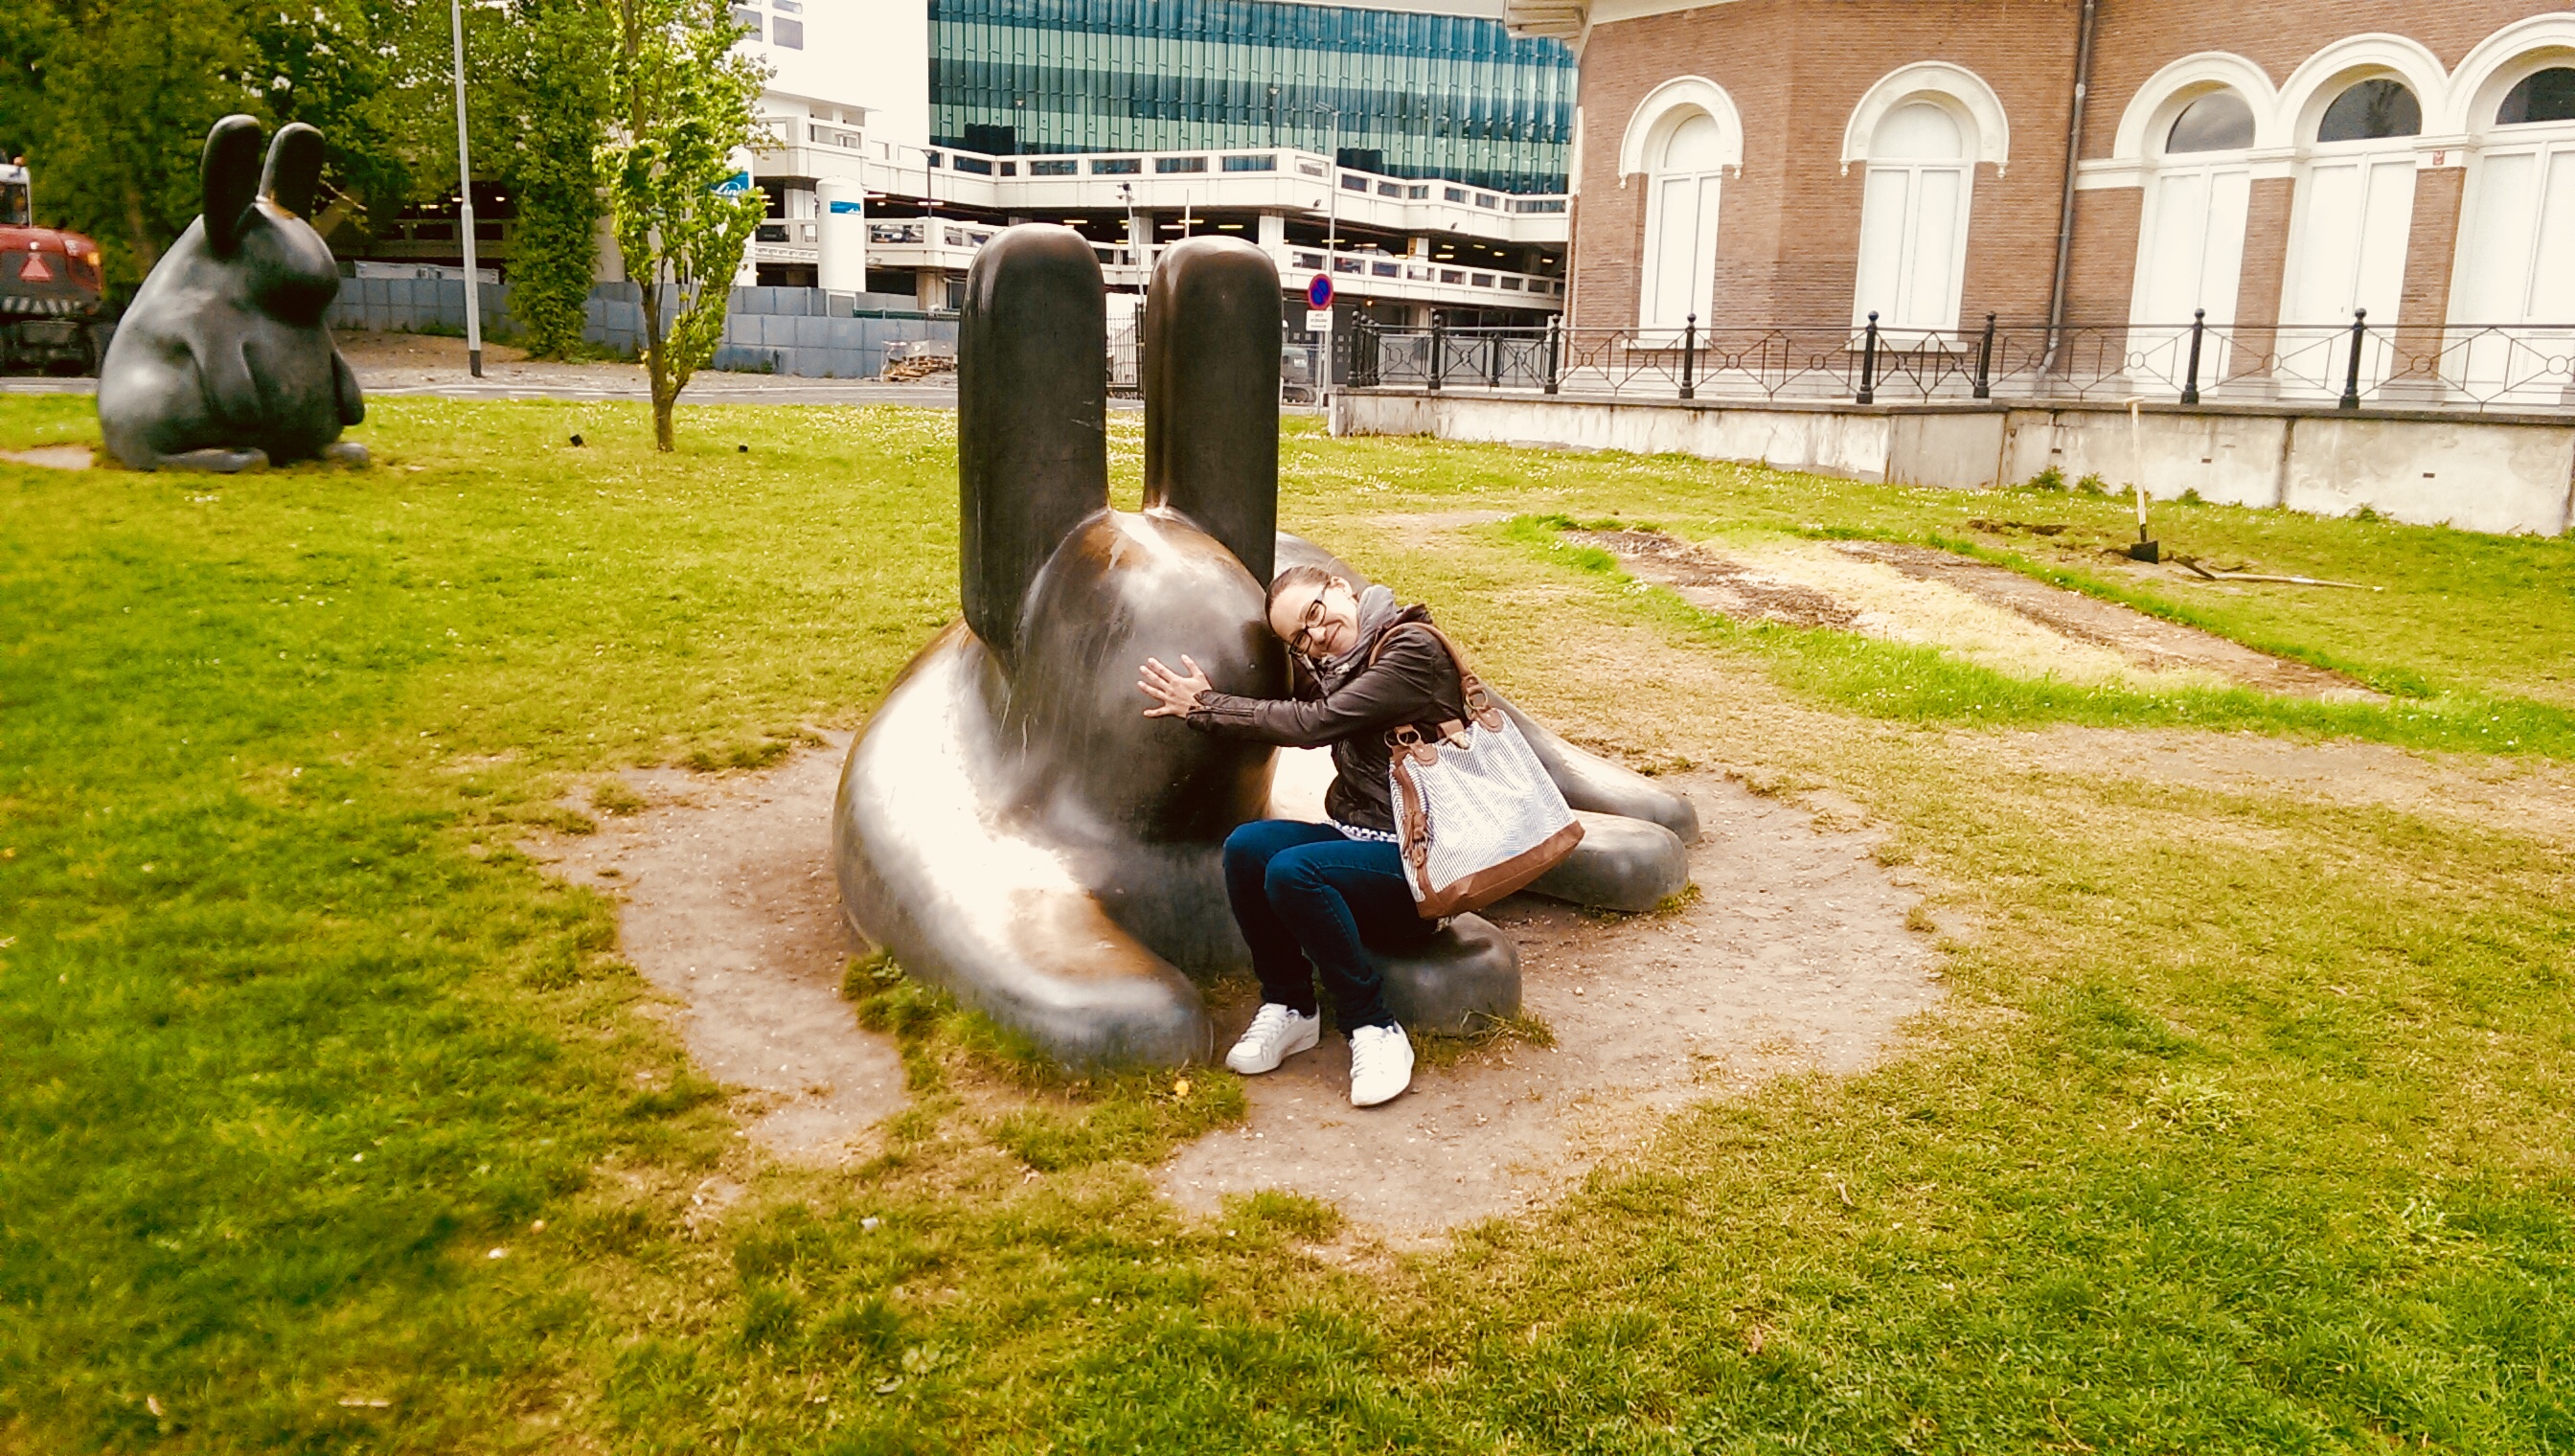 Kunsthal park in Rotterdam 